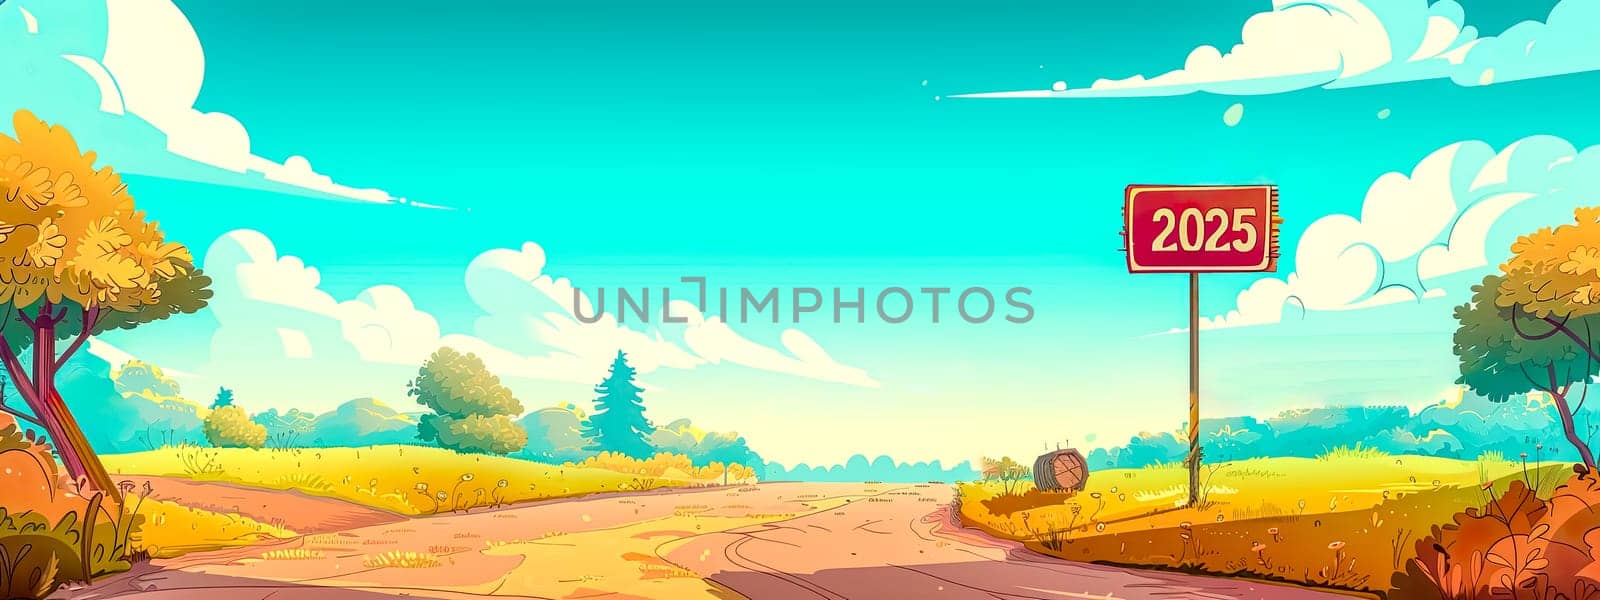 Colorful illustration of a tranquil countryside road leading towards a sign with the year 2025